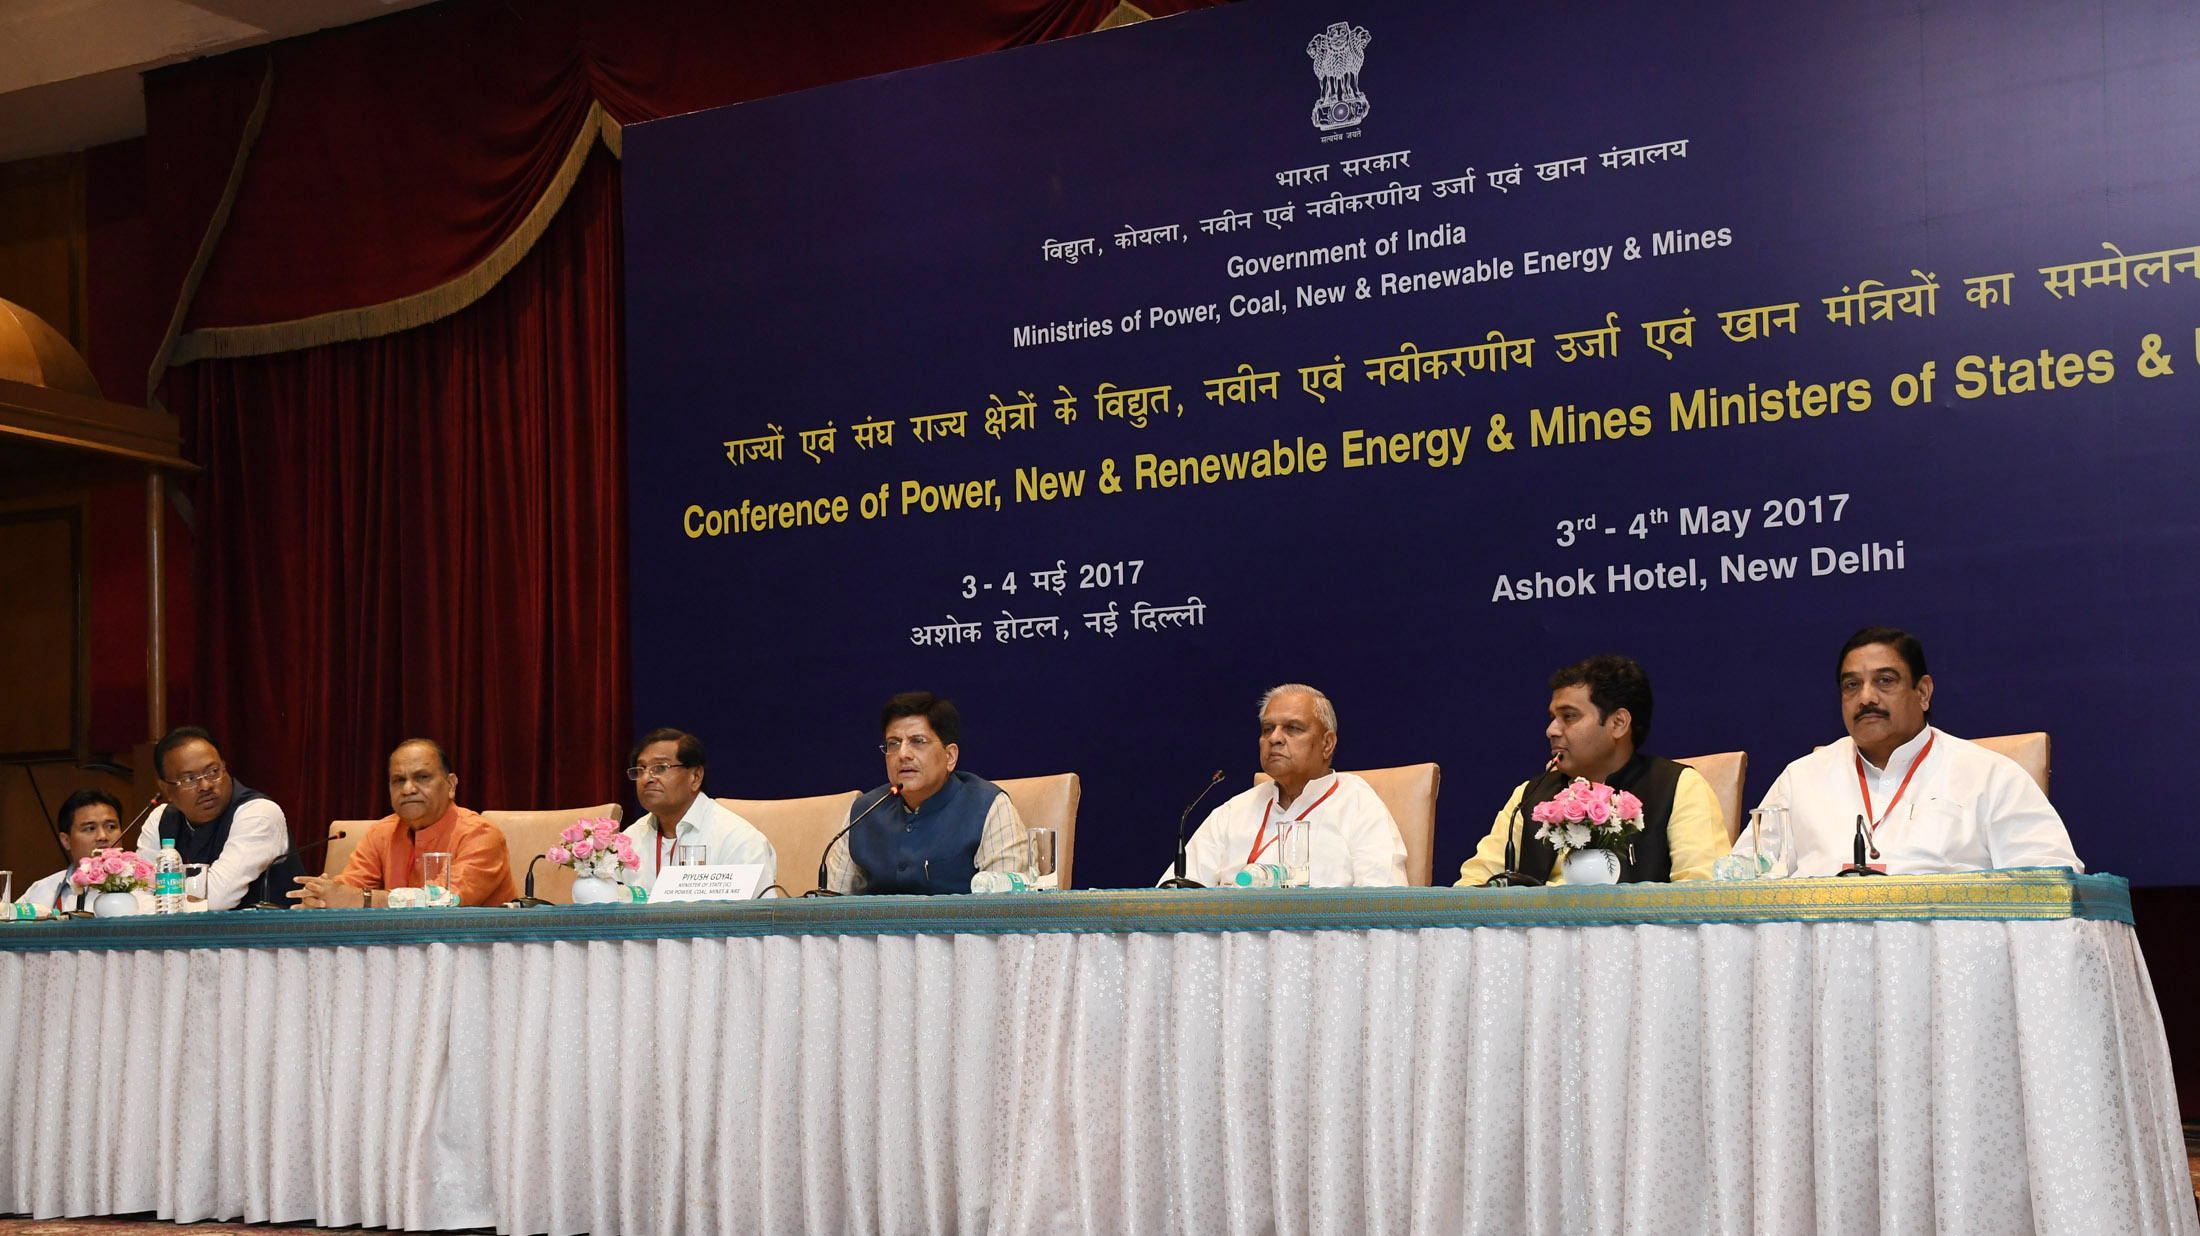 The Minister of State for Power, Coal, New and Renewable Energy and Mines (Independent Charge), Shri Piyush Goyal addressing the media on the outcomes of the States Power Ministers/UTs Conference, in New Delhi on May 04, 2017.